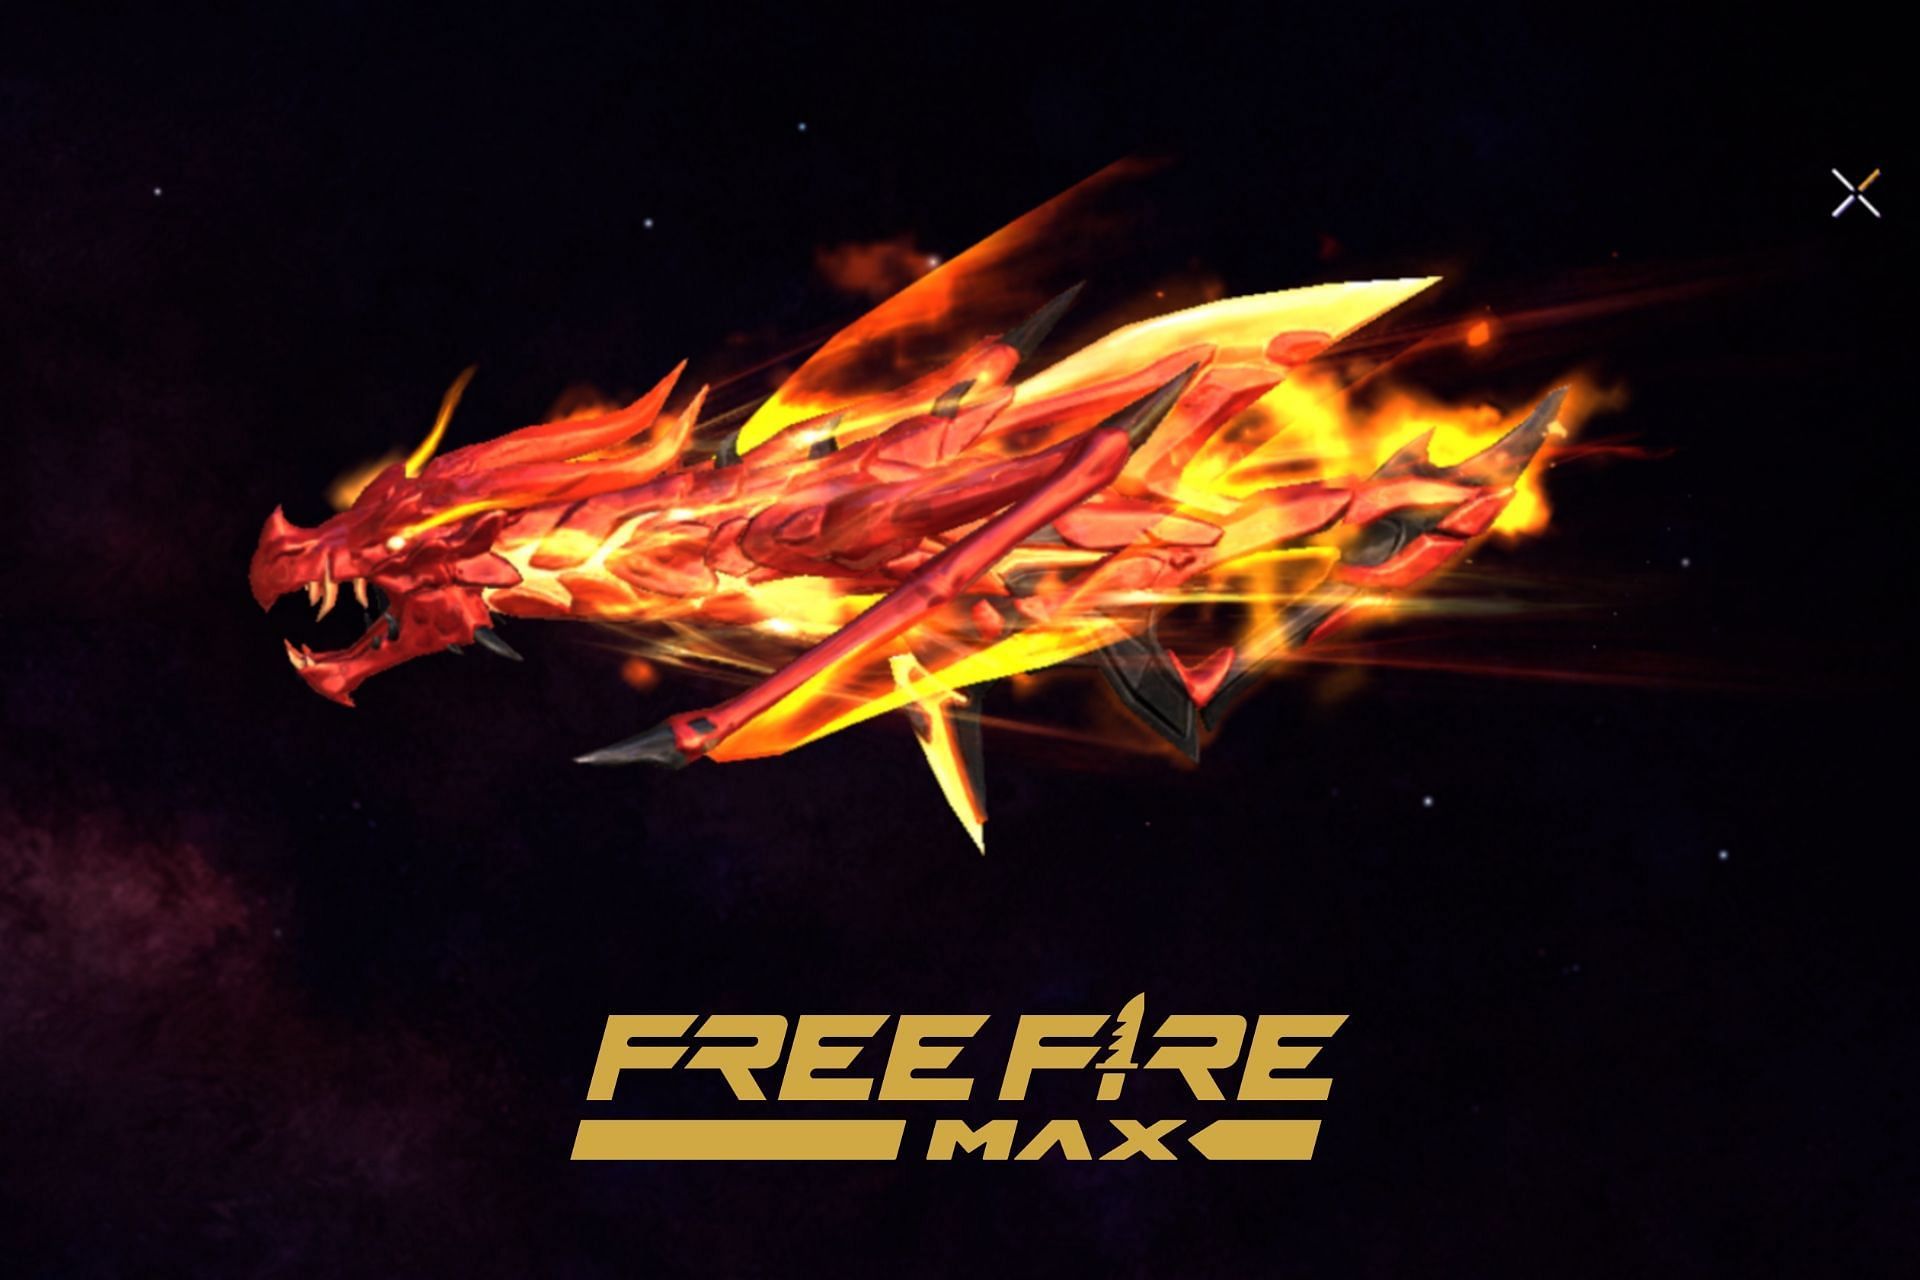 Final chance to grab mythic Infernal Draco M4A1 in Free Fire MAX (Image via Garena)